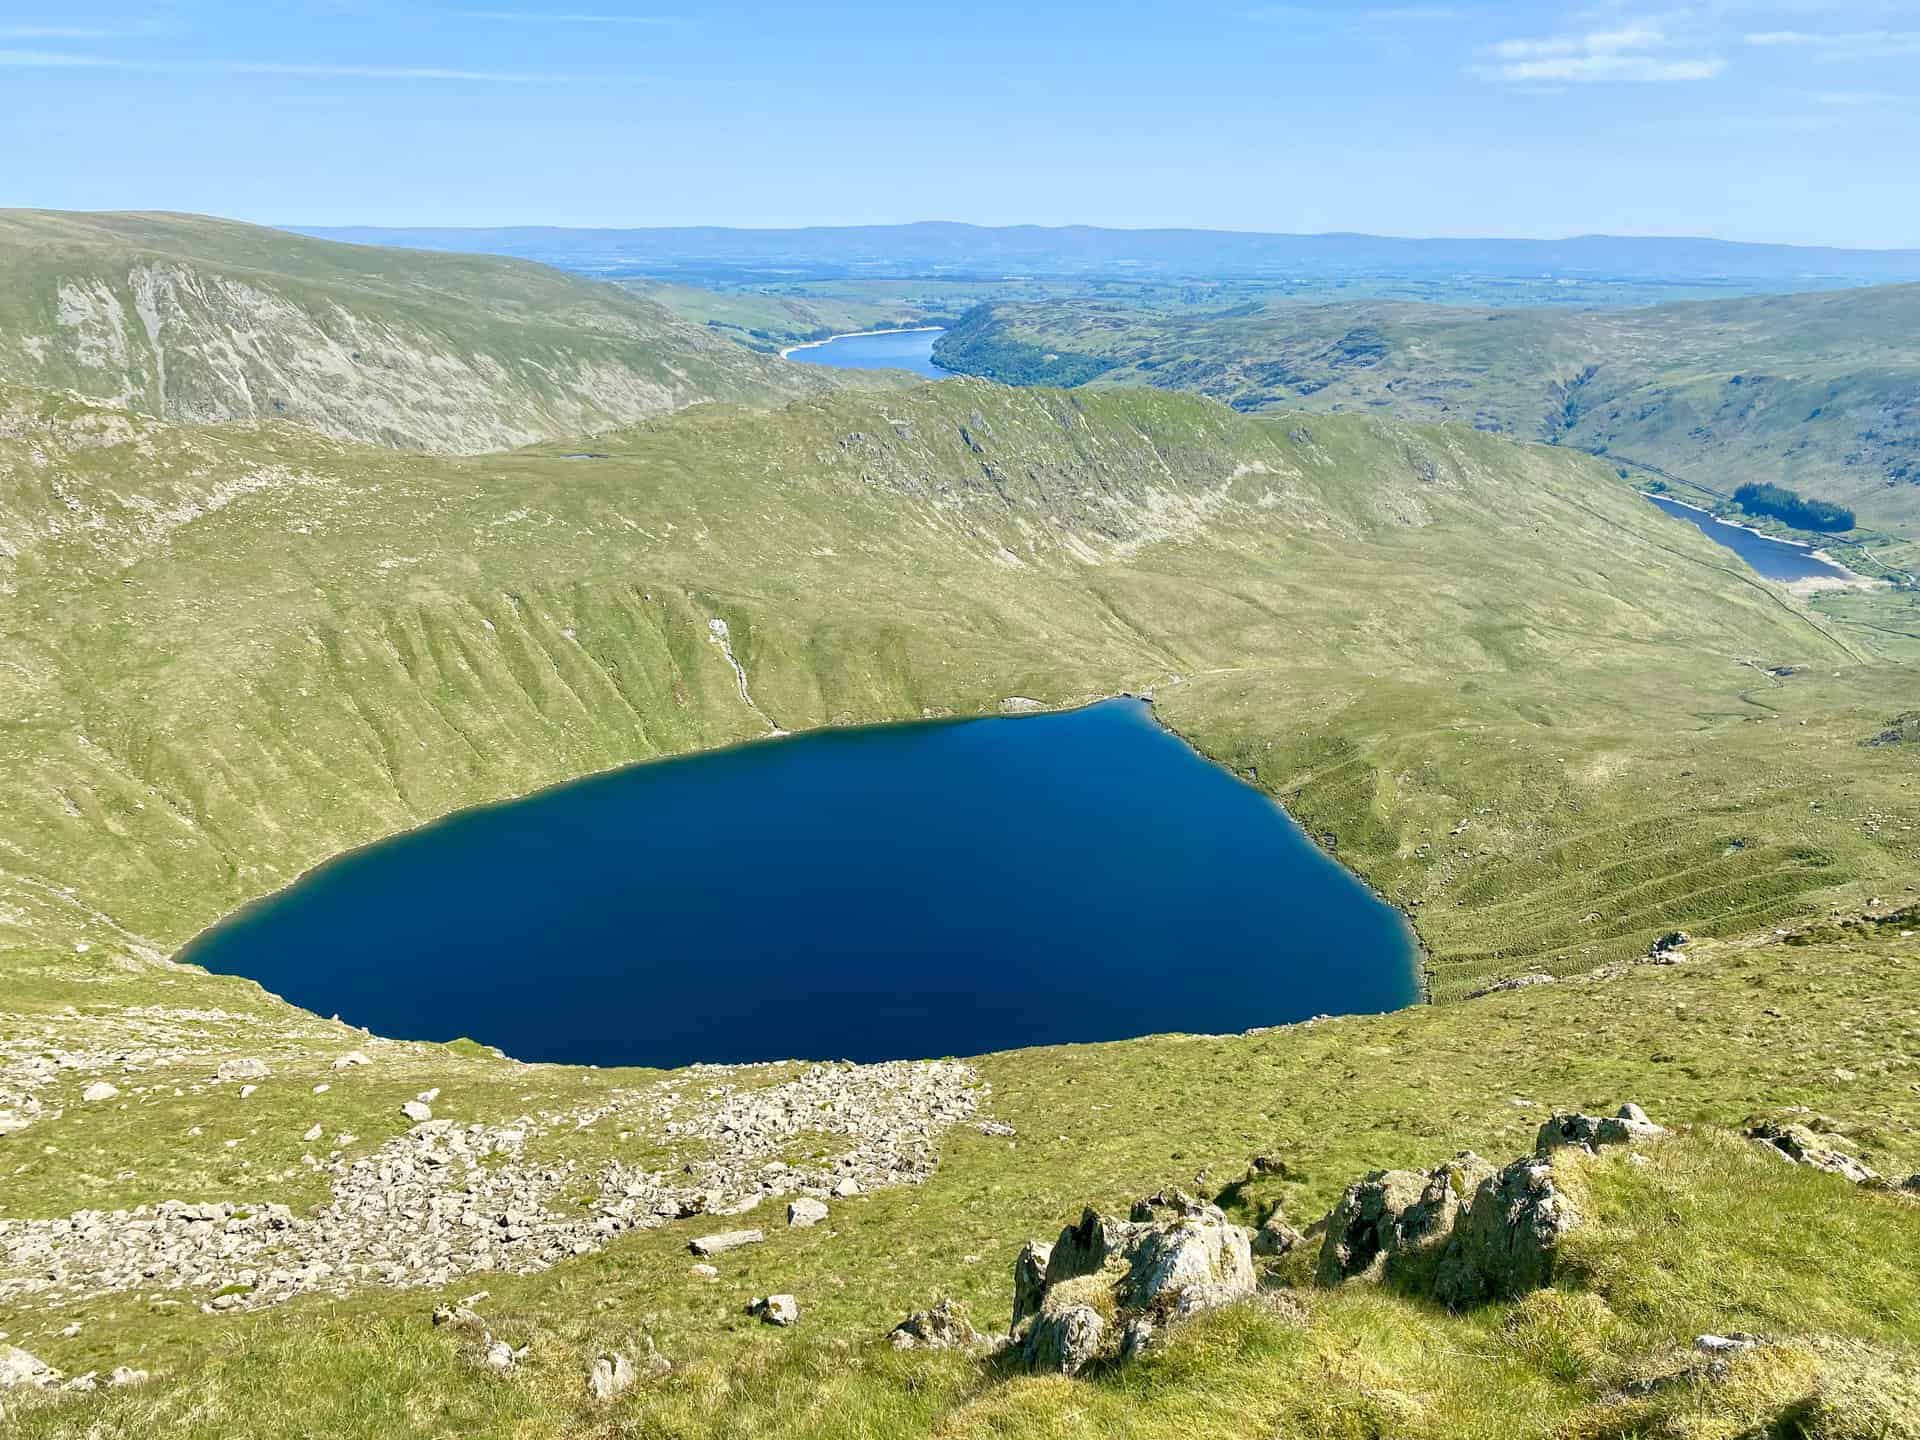 In a tale that dates back thousands of years, a peculiar giant with an obsession for ironing his shirts roamed the High Street mountain in the Lake District. One windy day, a gust blew his ironing board over, causing the enormous iron to plummet and create a huge crater. Over time, this crater filled with water to become what we now know as Blea Water, which interestingly is shaped like an iron. So, the next time you visit Blea Water, spare a thought for the giant whose laundry mishap led to the creation of this beautiful lake.